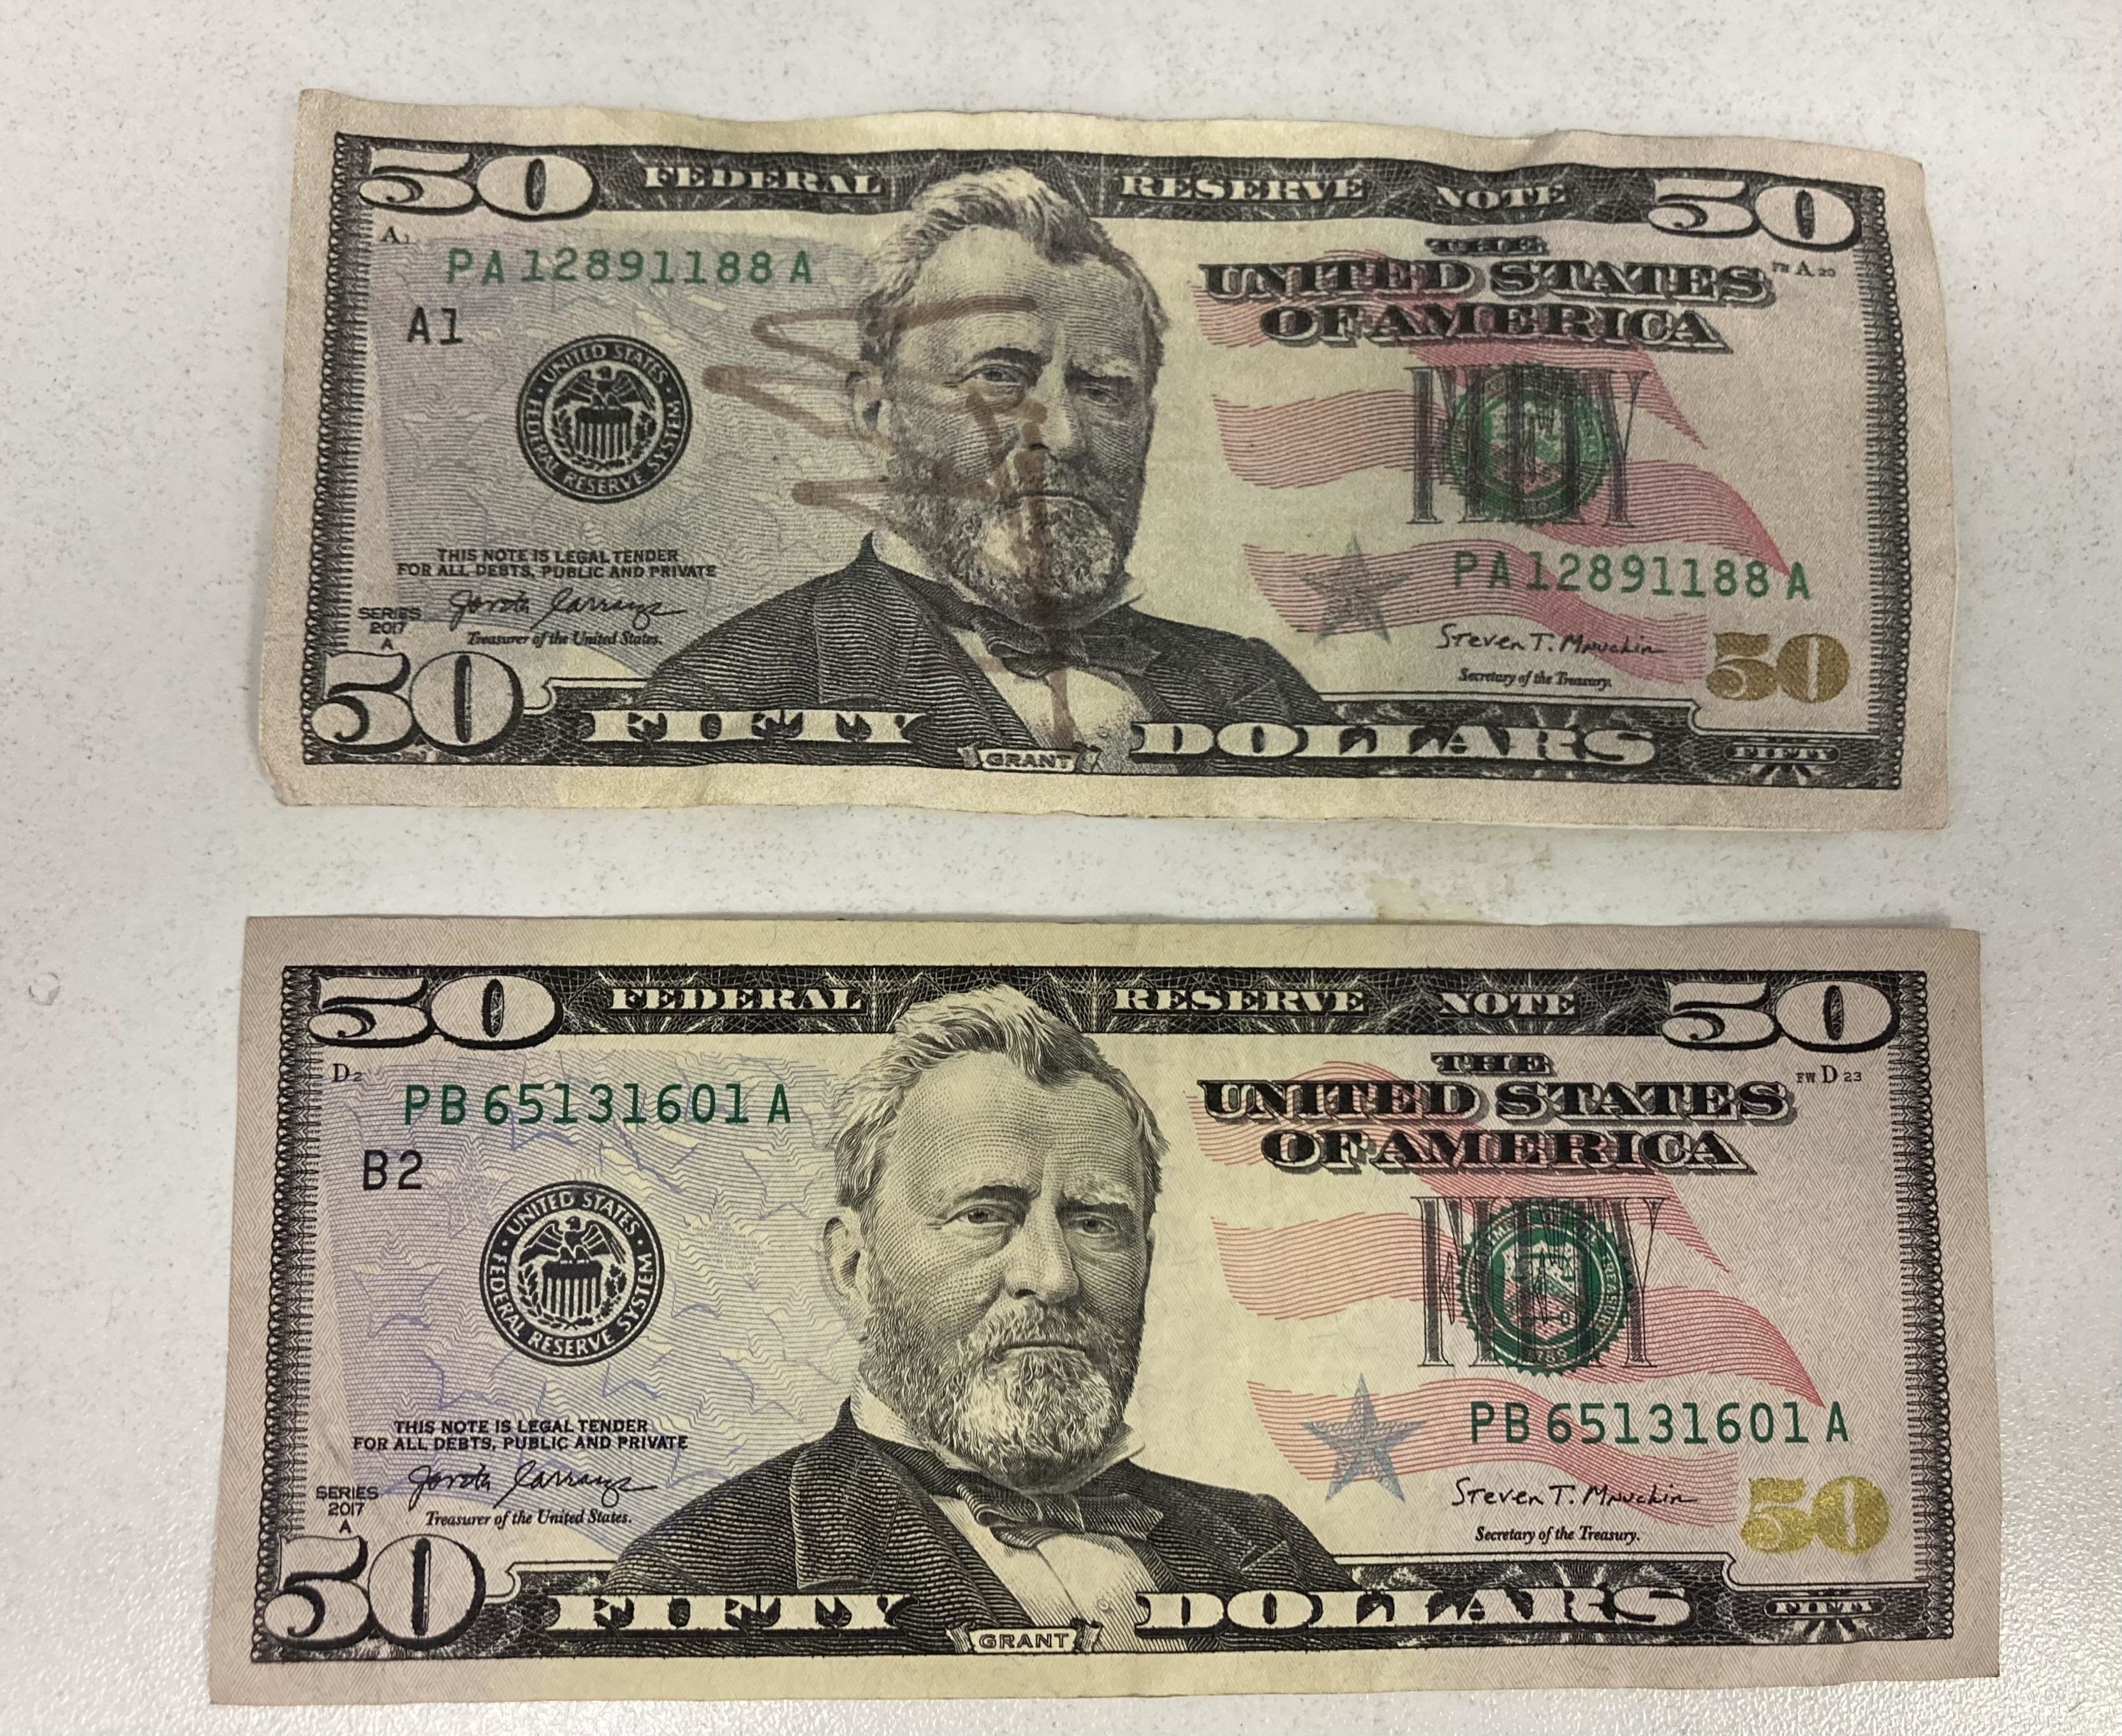 Two US $50 bills, one above the other, with slight design differences